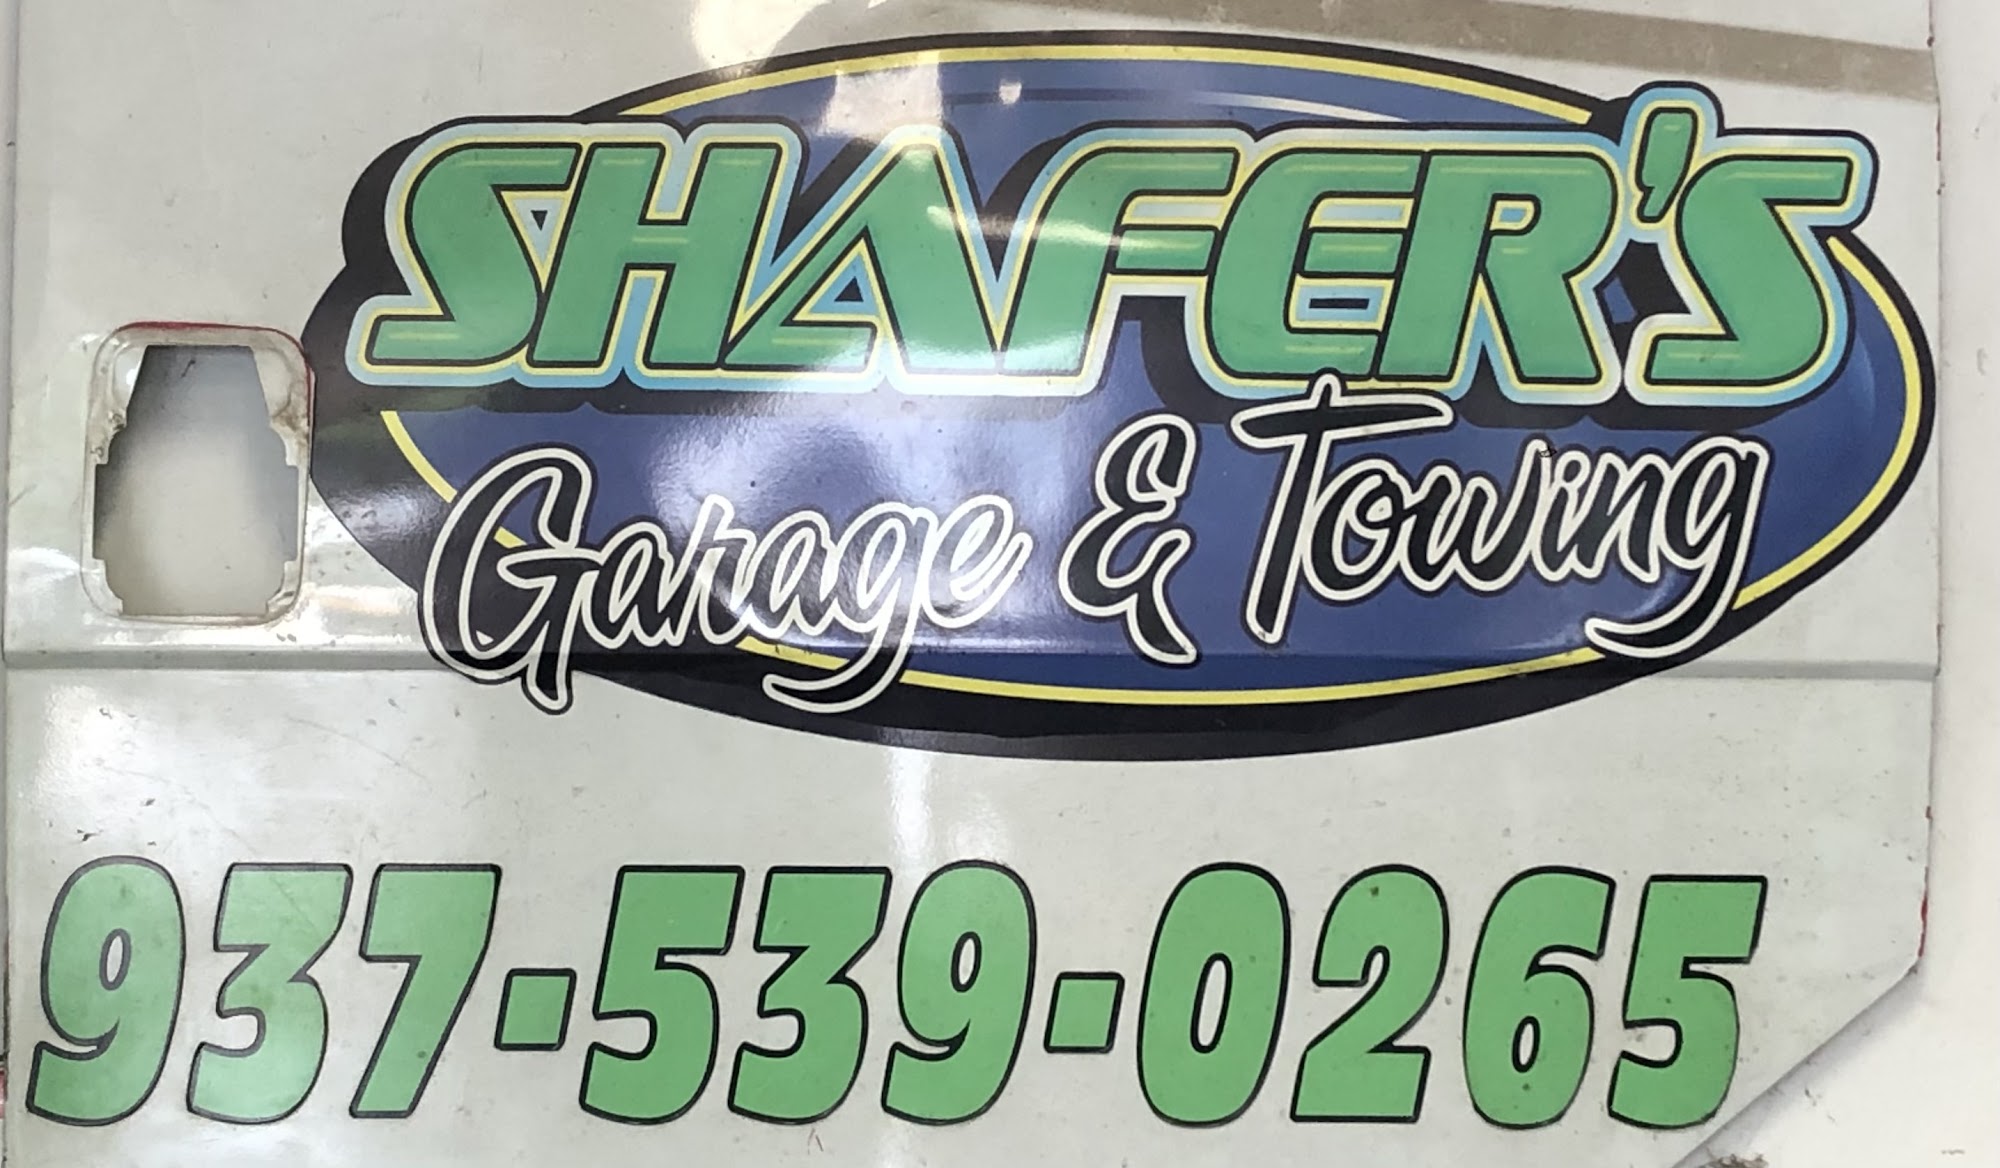 Shafer's Towing